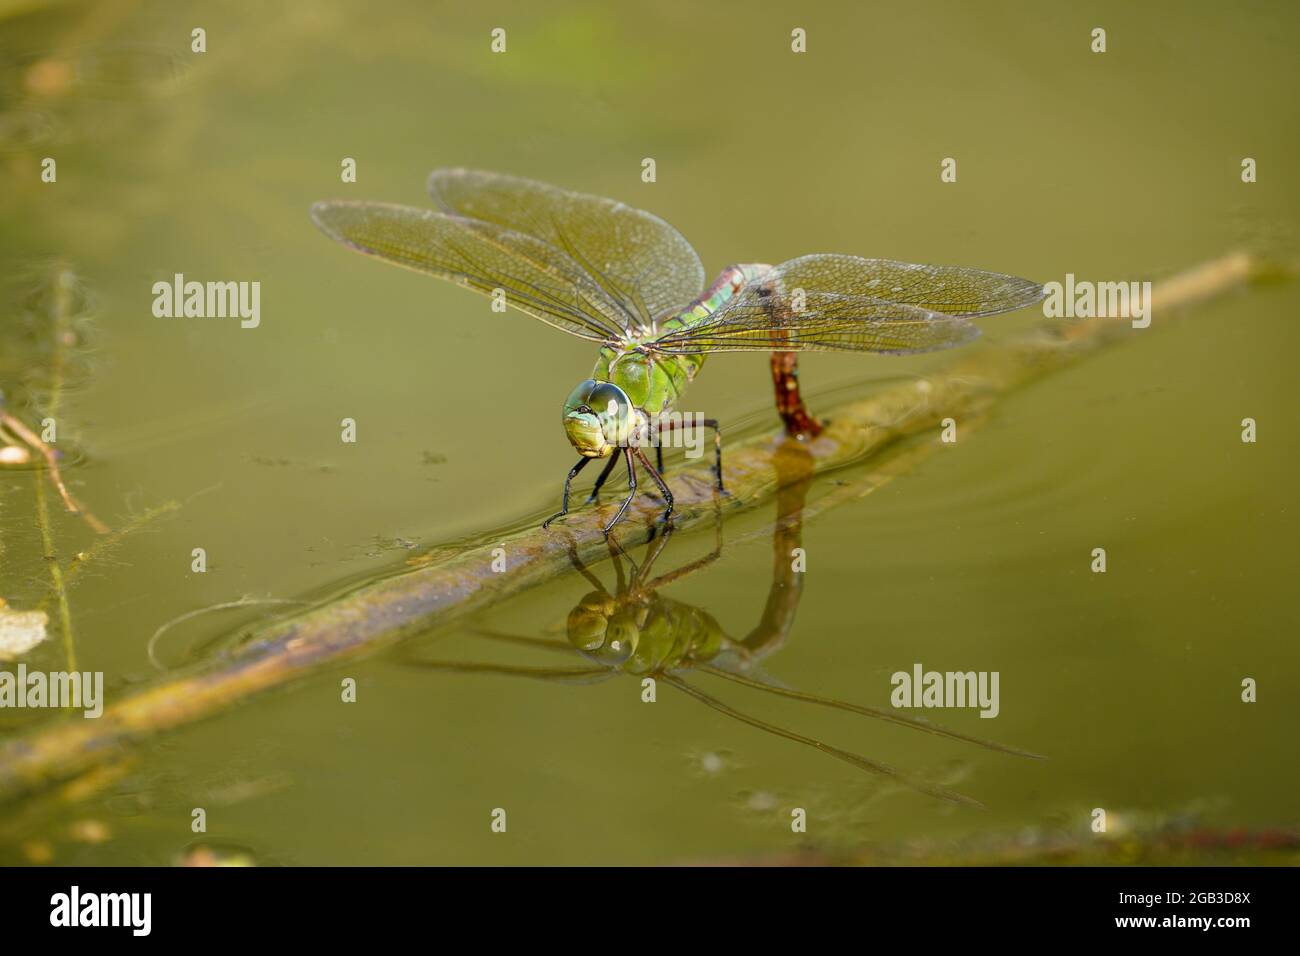 Emperor dragonfly, Anax imperator dragonfly, laying eggs in water. Andalusia, Spain. Stock Photo